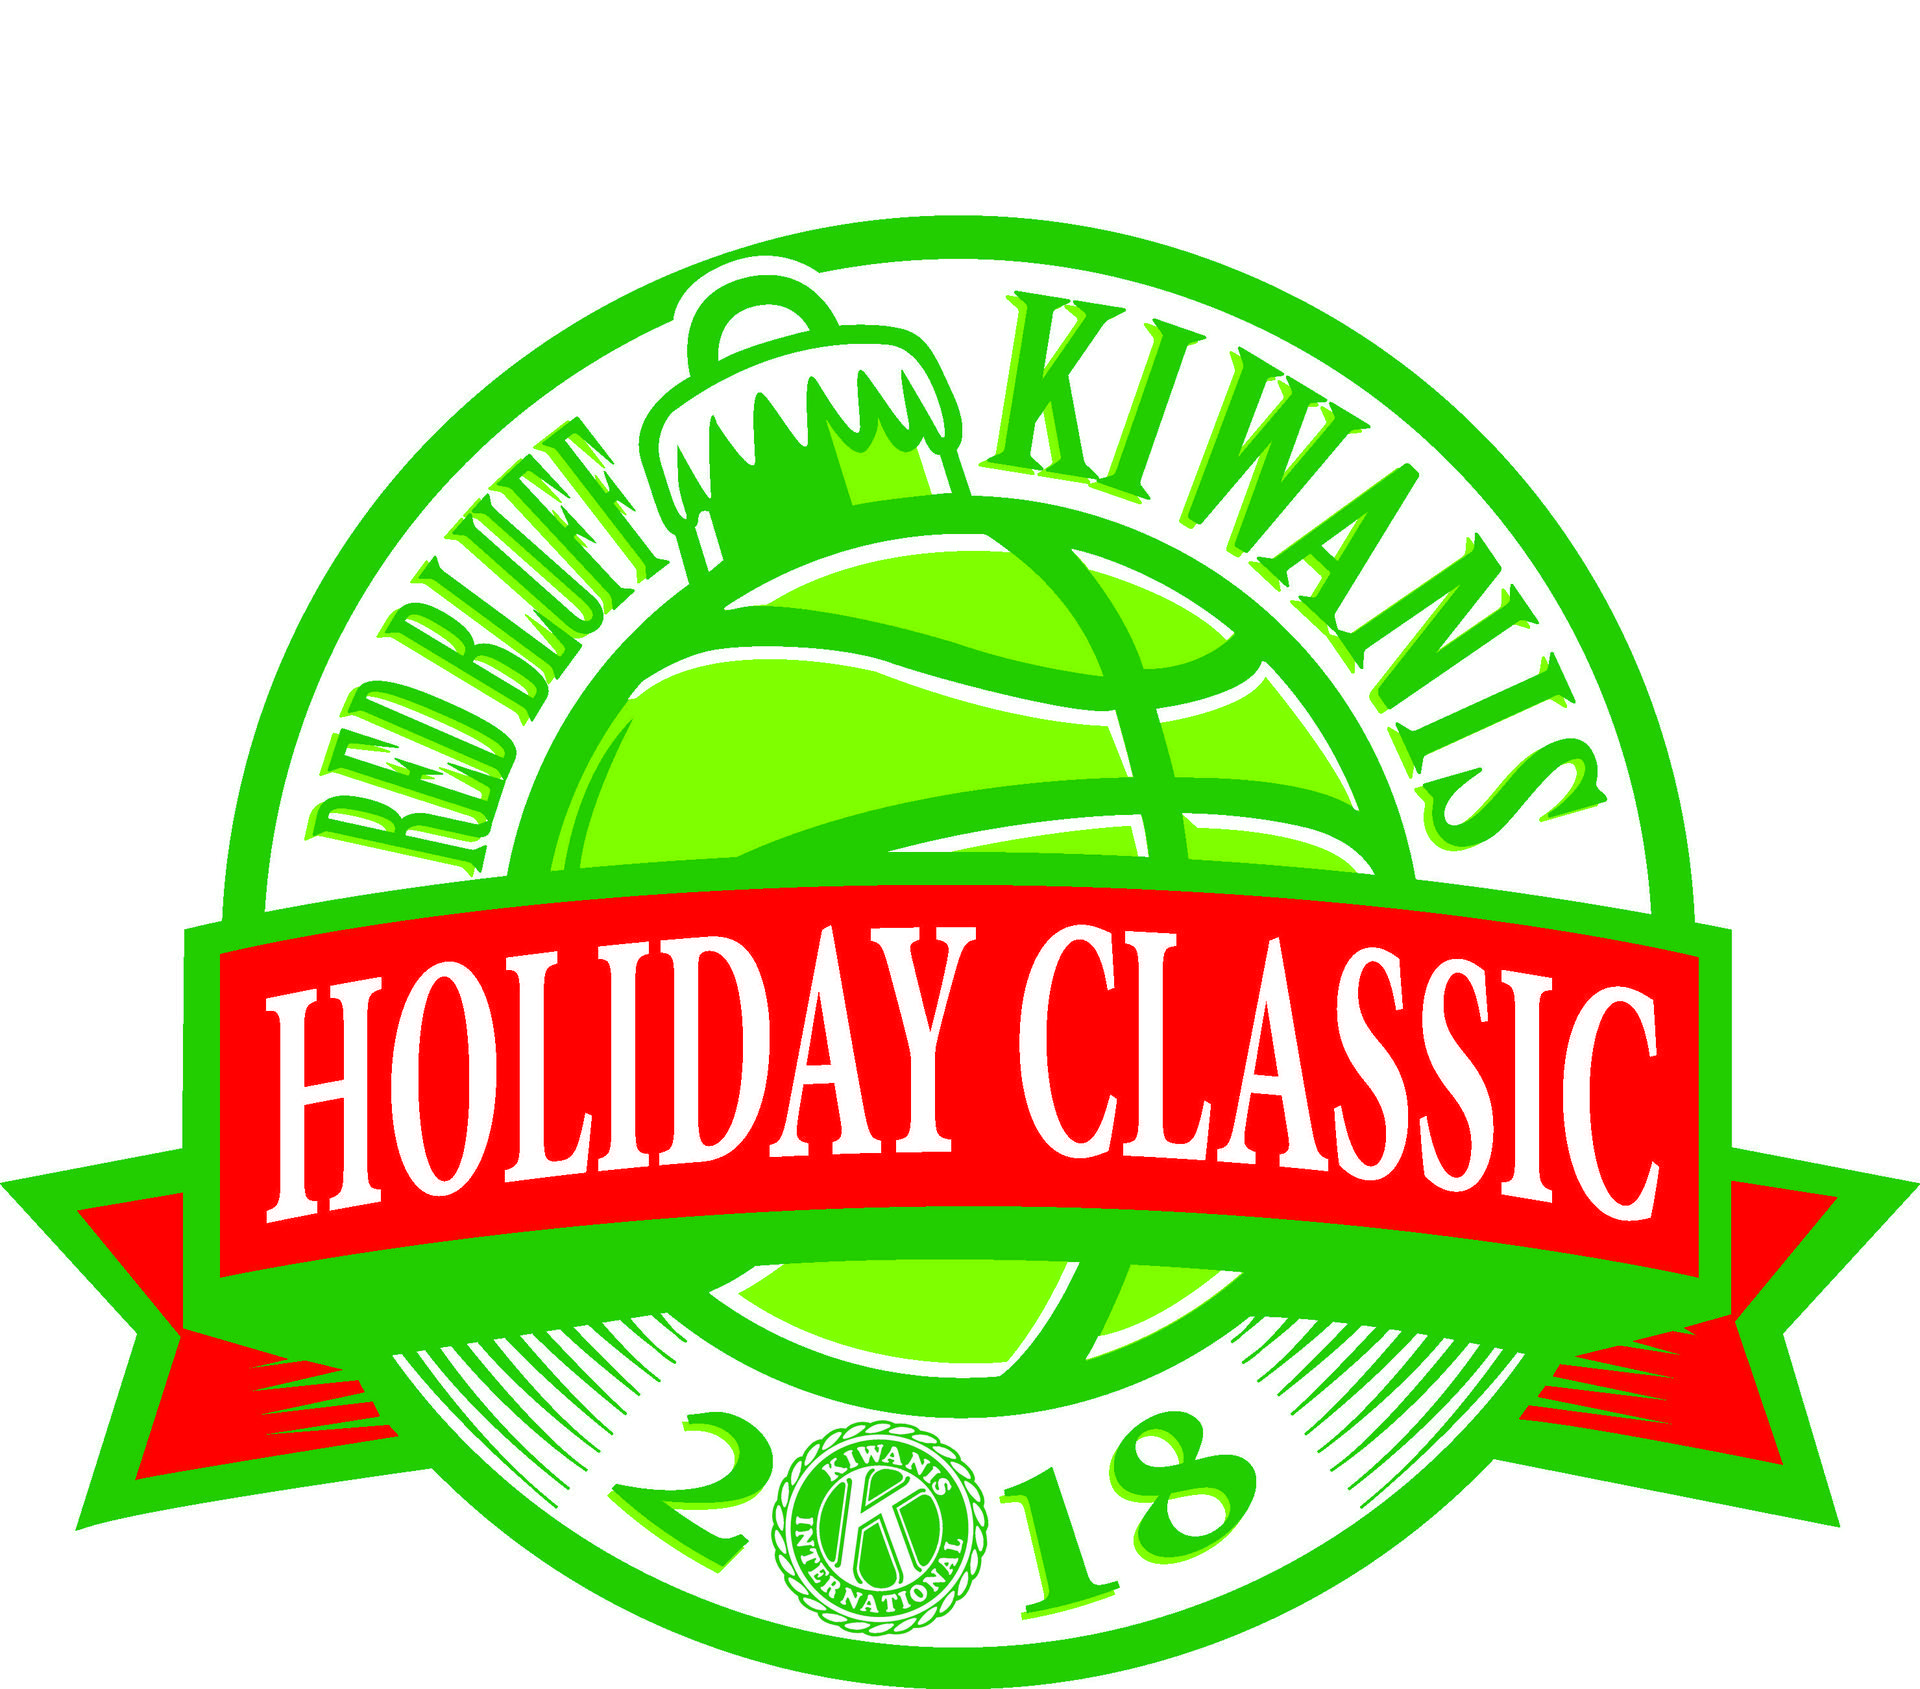 Red Bluff High School Holiday Classic Basketball